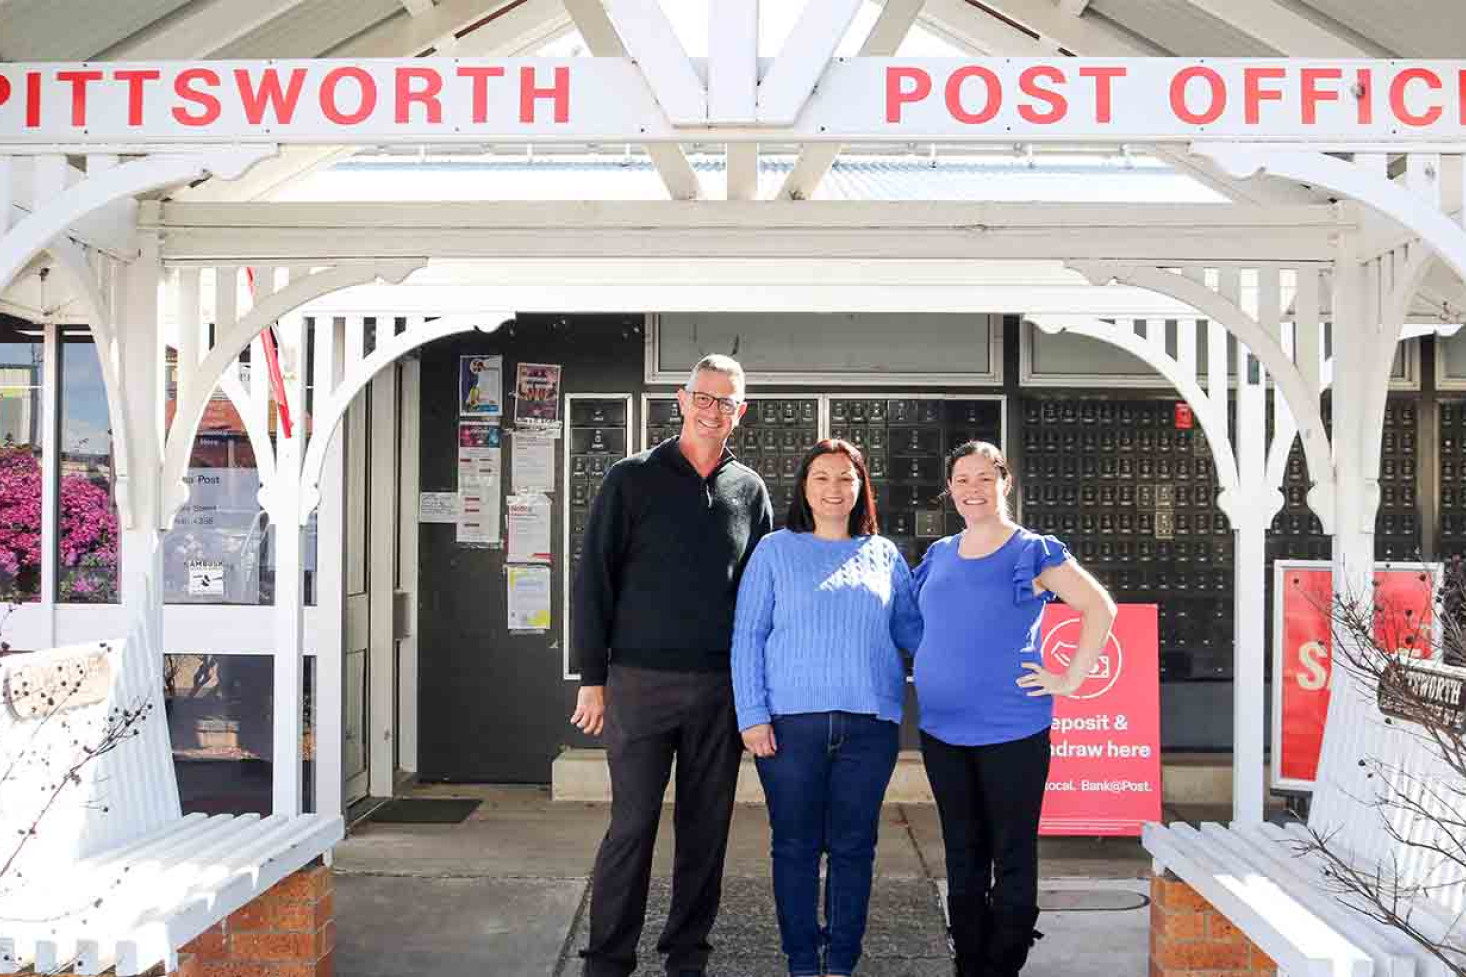 Rachel Anagnostopoulos (right) will be taking over ownership of the Pittsworth Post Office as of July 9, bringing an end to more than 14 years of Peter and Karen Miller’s service to the community.